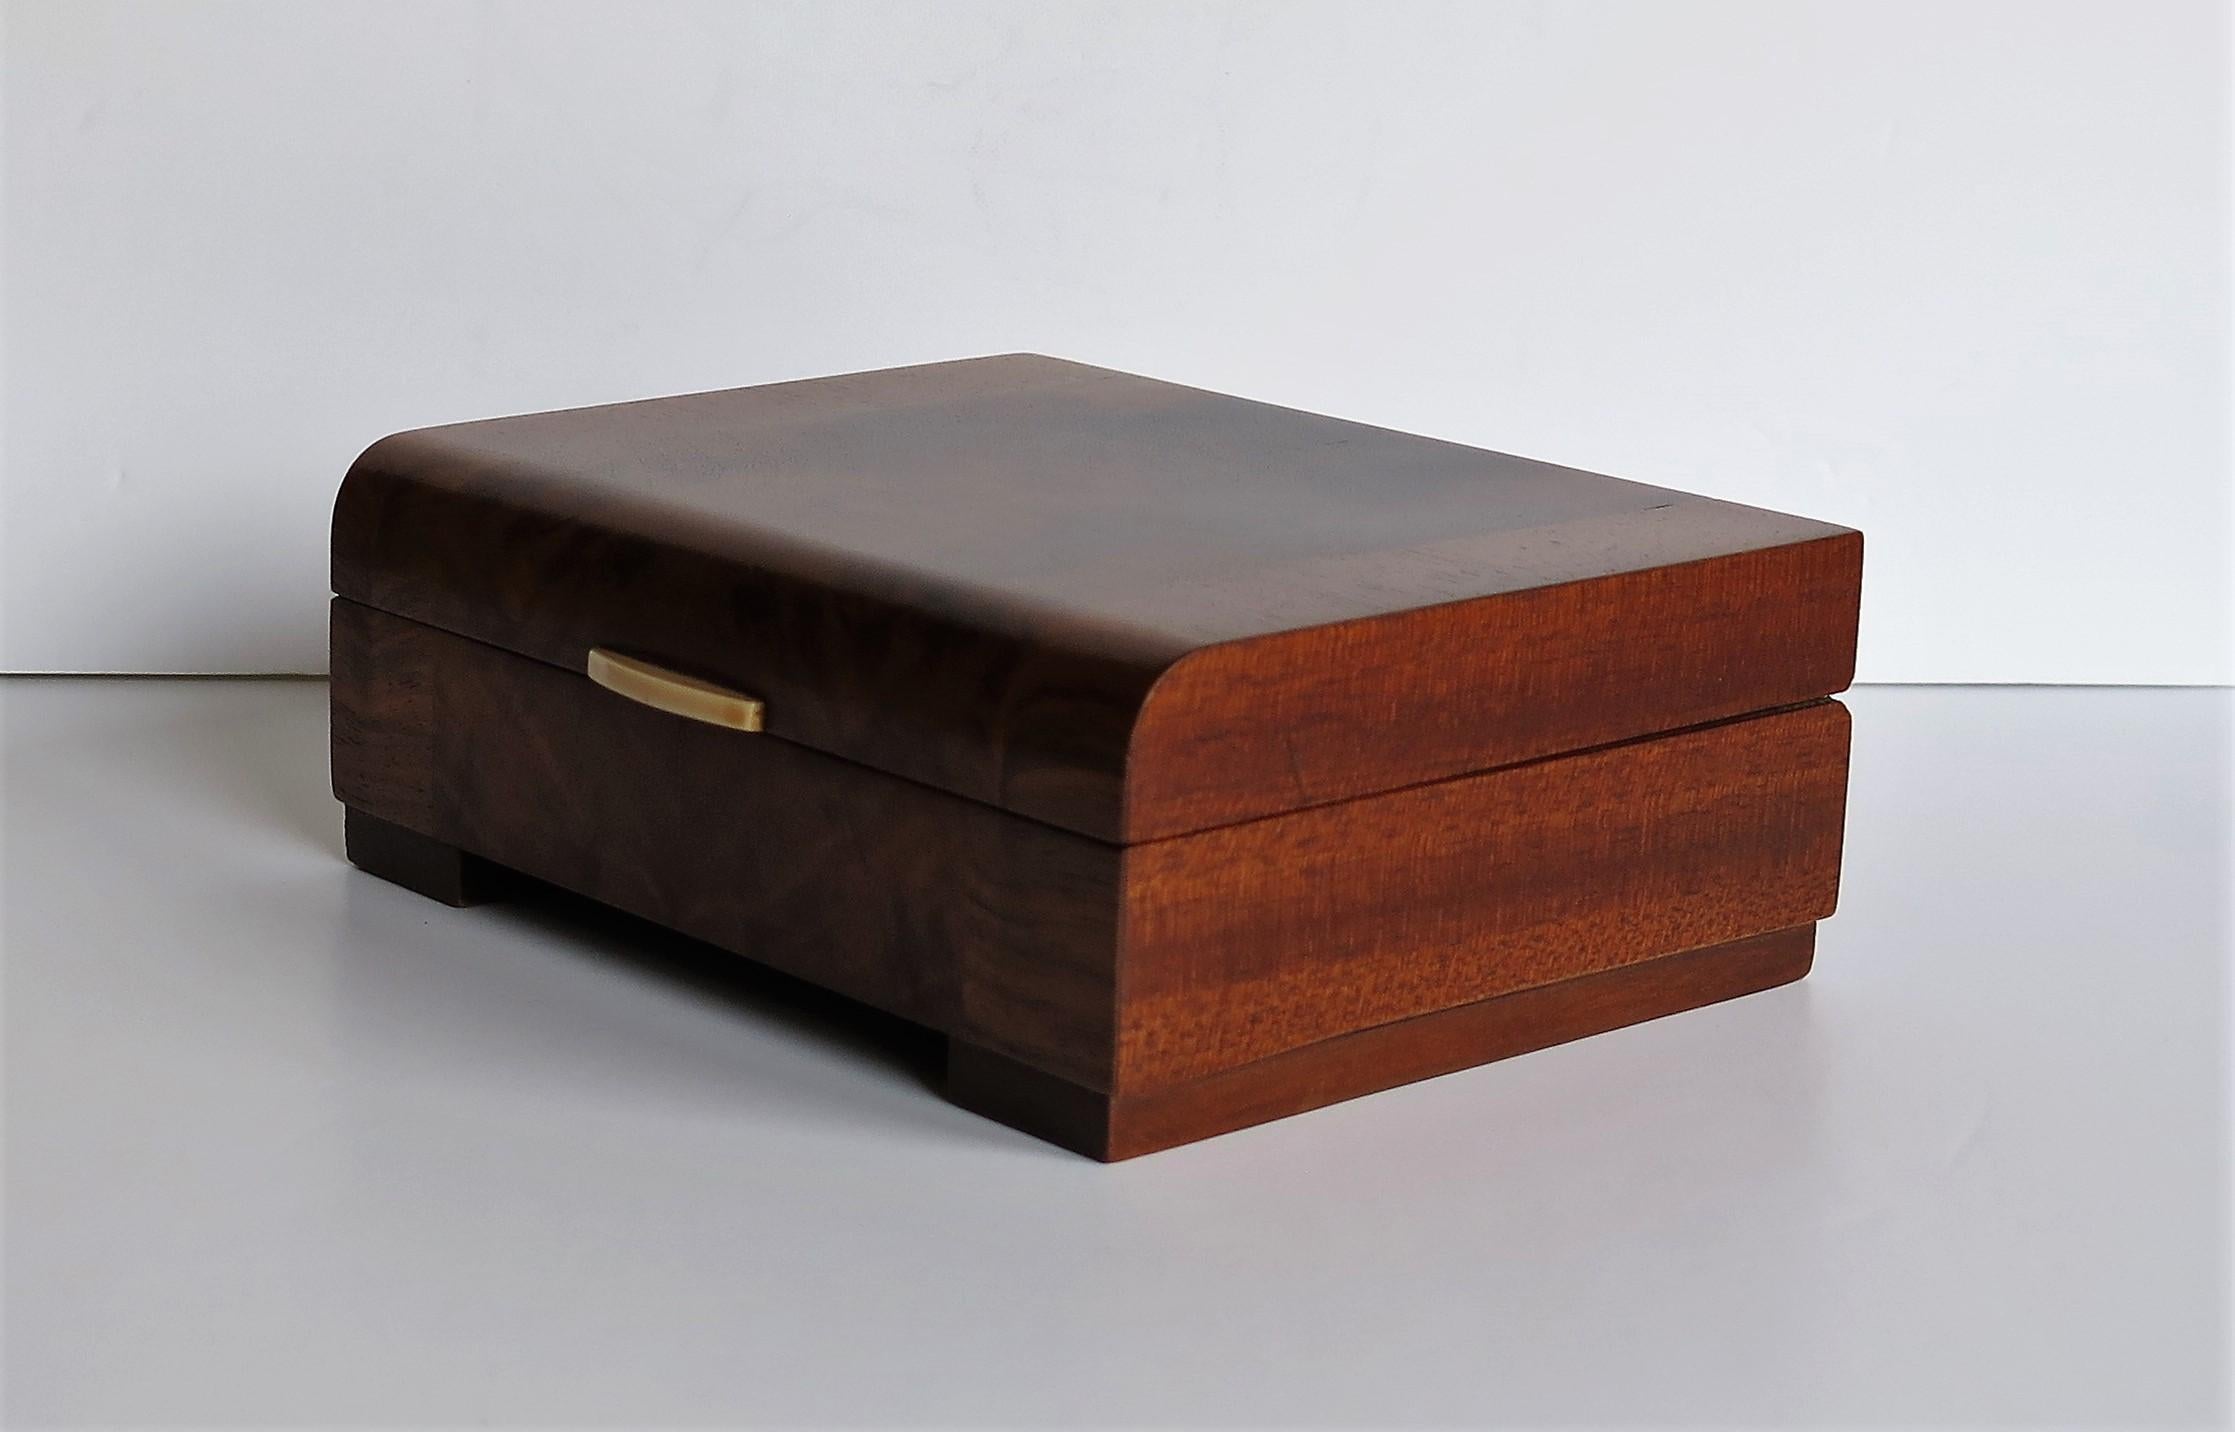 20th Century Art Deco Lidded Box Mahogany and Burr Walnut with Two Compartments, circa 1925